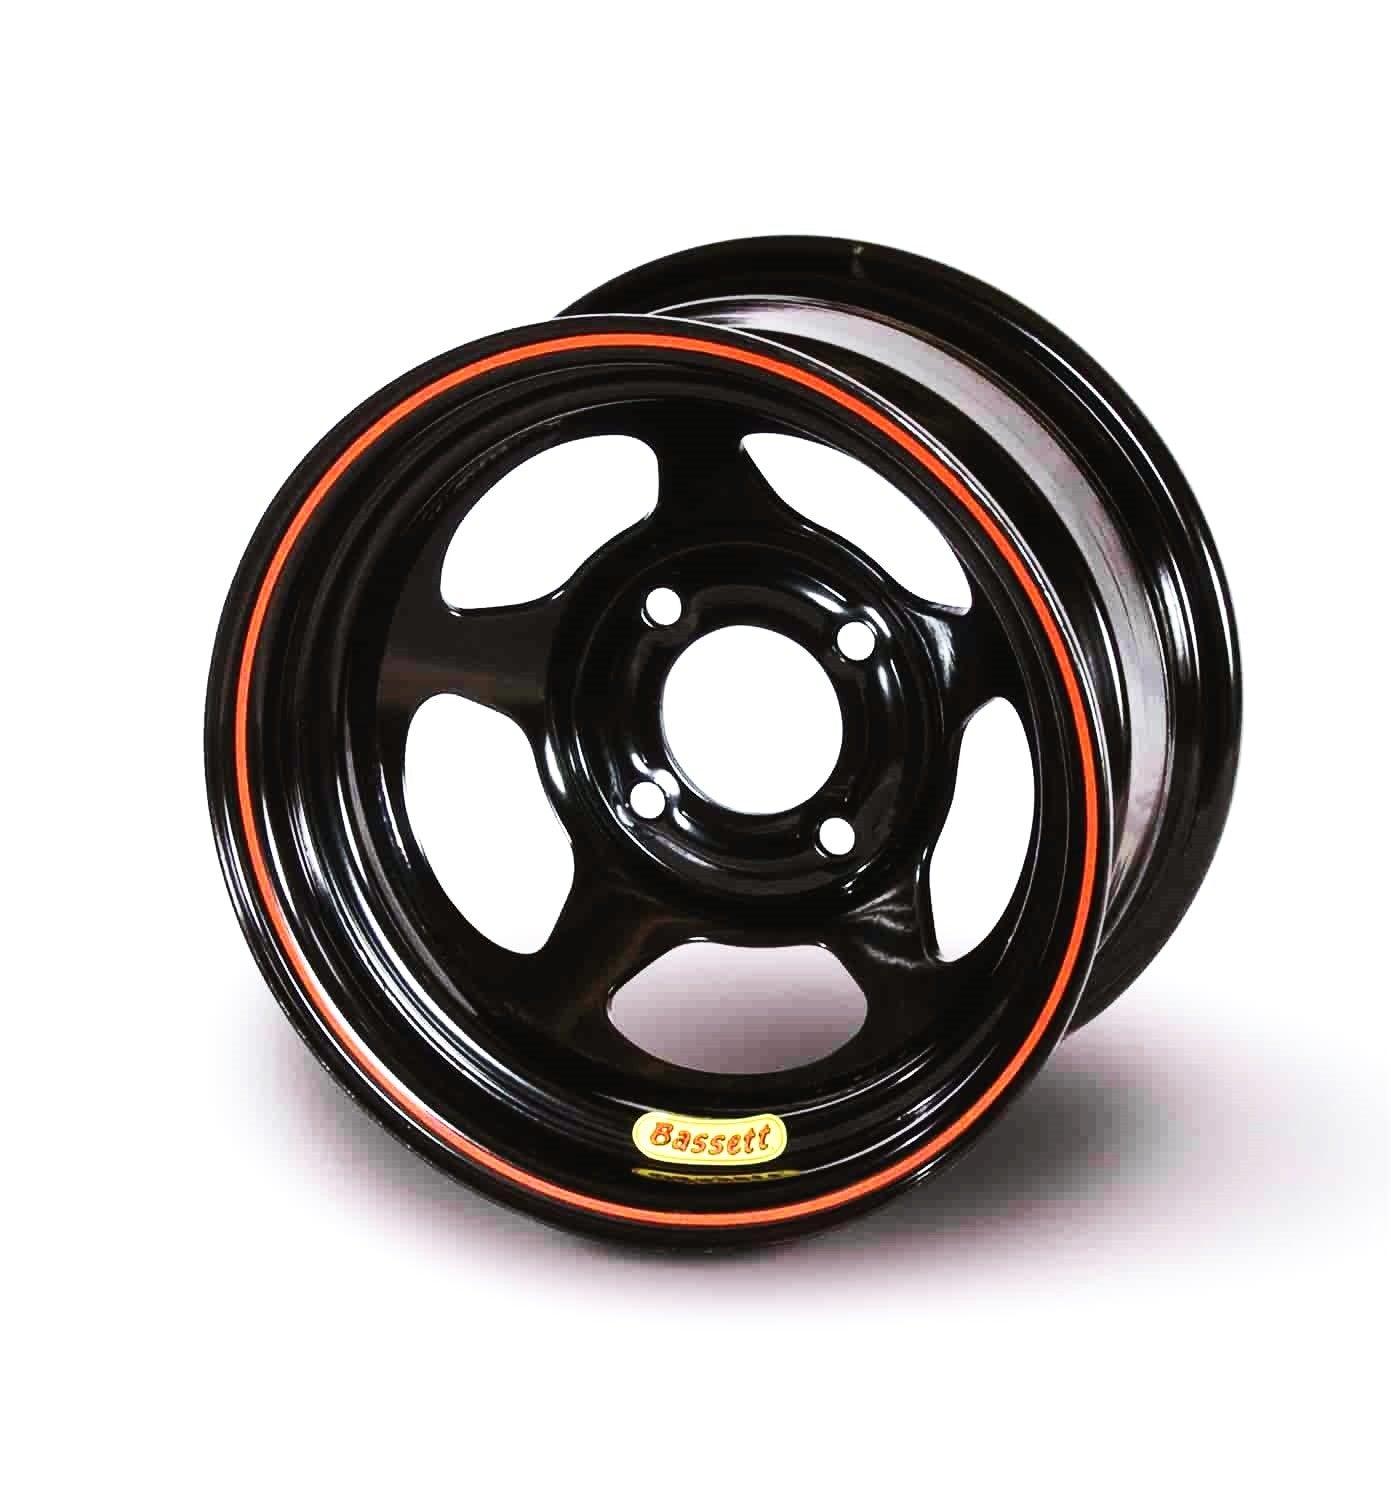 Wheel 13in x 8in 5x100mm Black - Burlile Performance Products